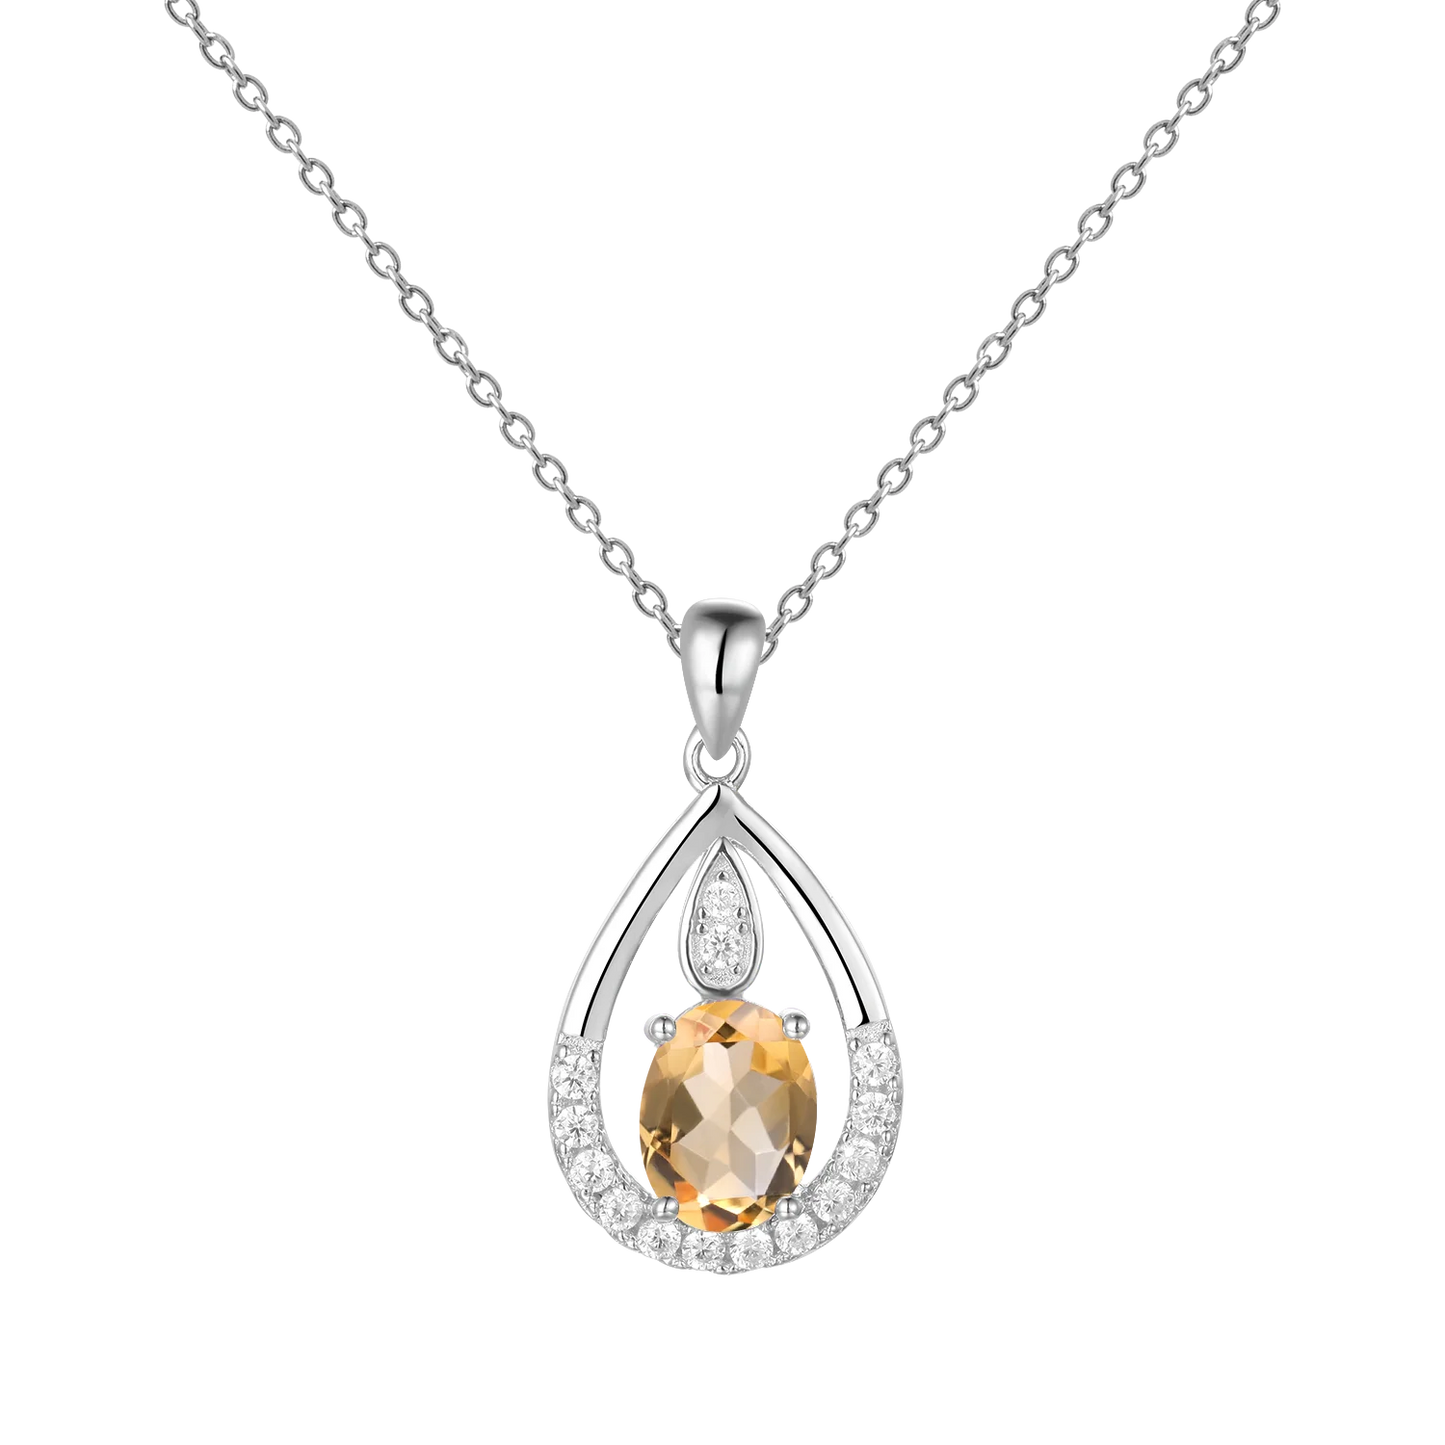 Gem's Ballet December Birthstone Topaz Necklace 6x8mm Oval Pink Topaz Pendant Necklace in 925 Sterling Silver with 18" Chain Citrine